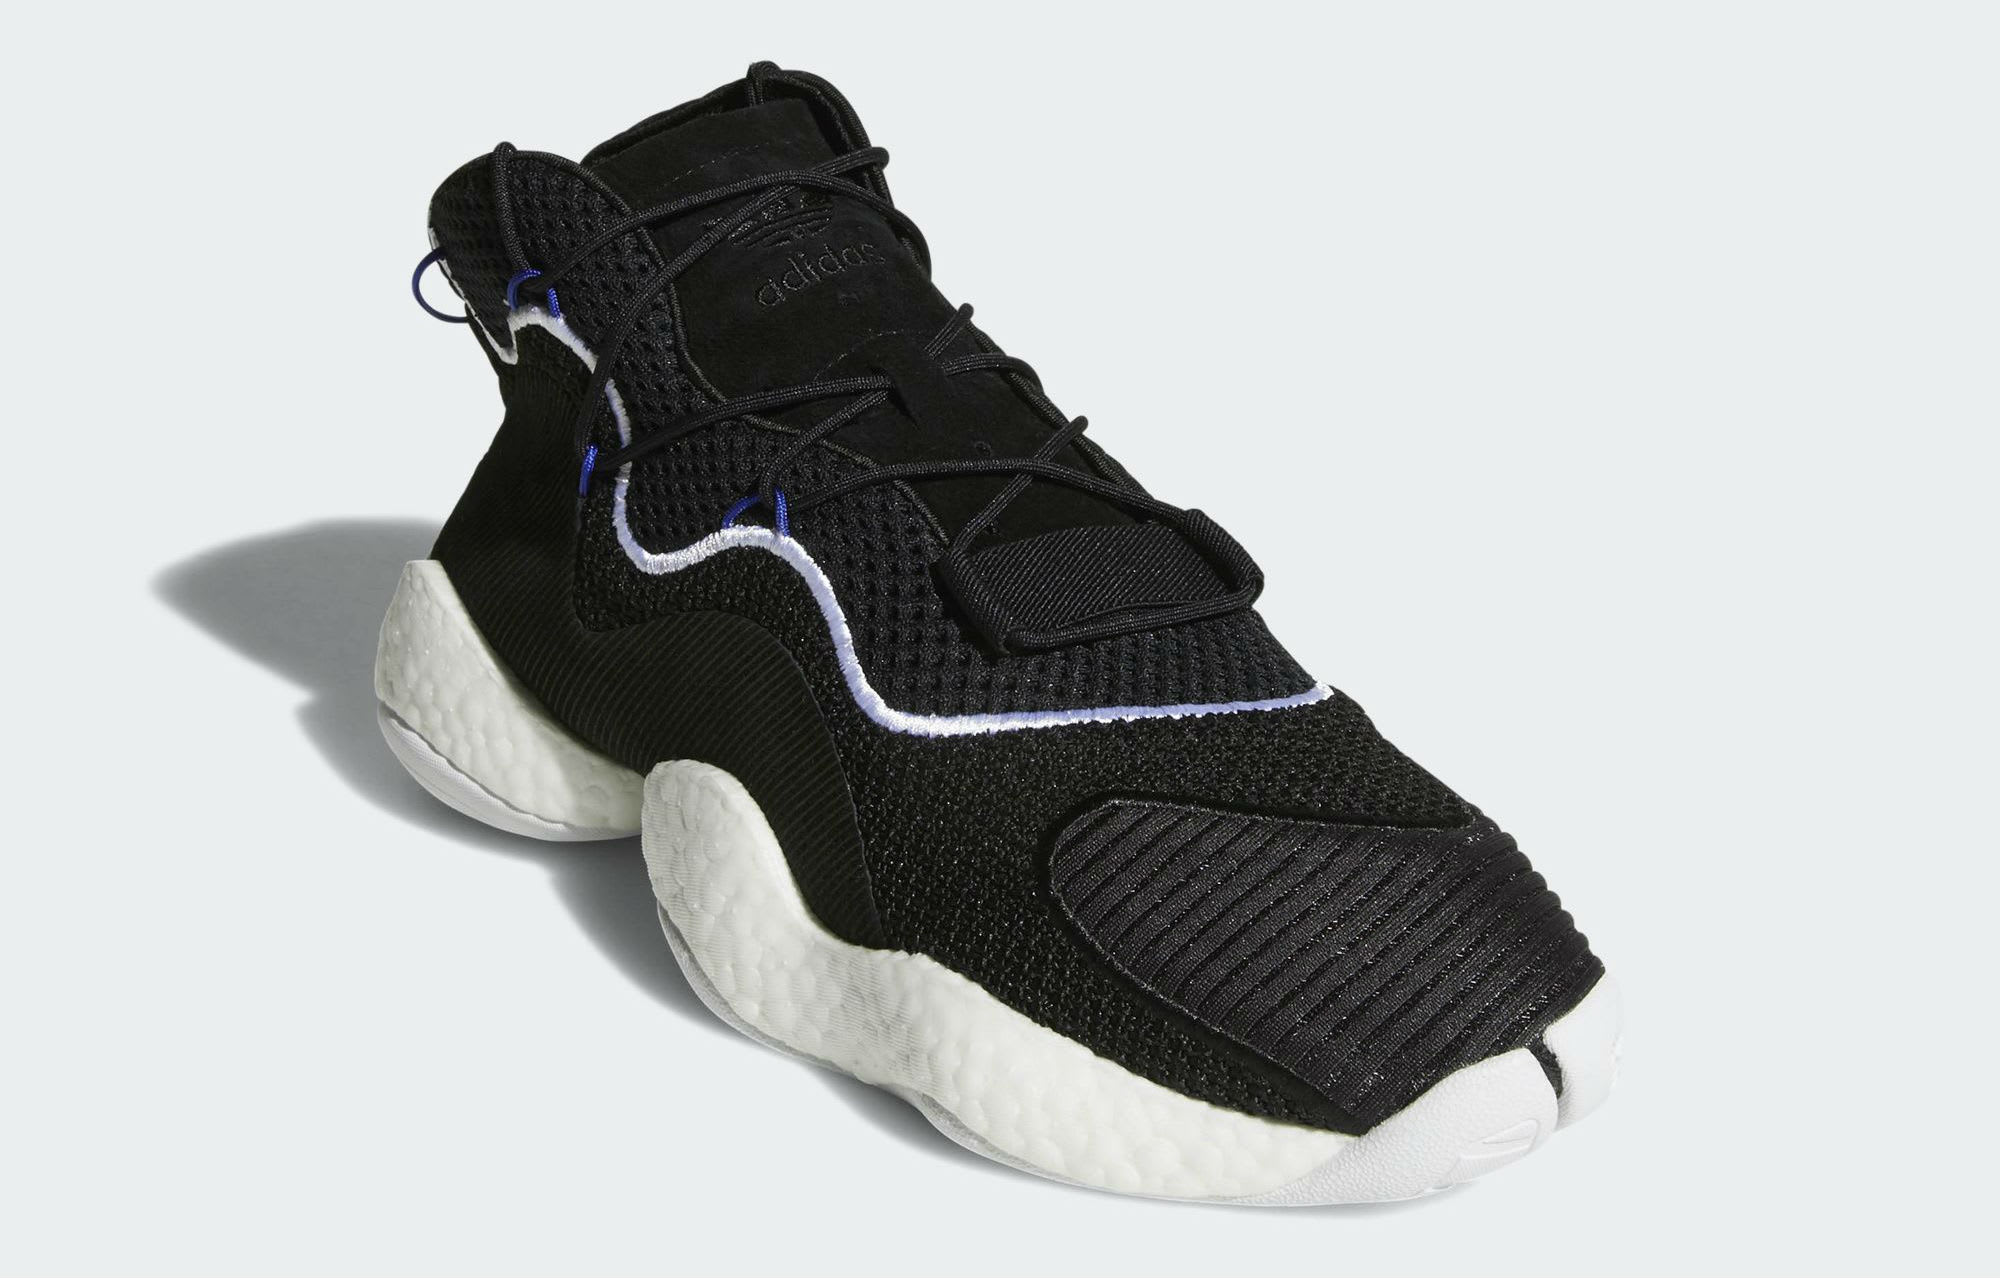 Adidas Crazy BYW LVL 1 Black White Release Date CQ0991 Front